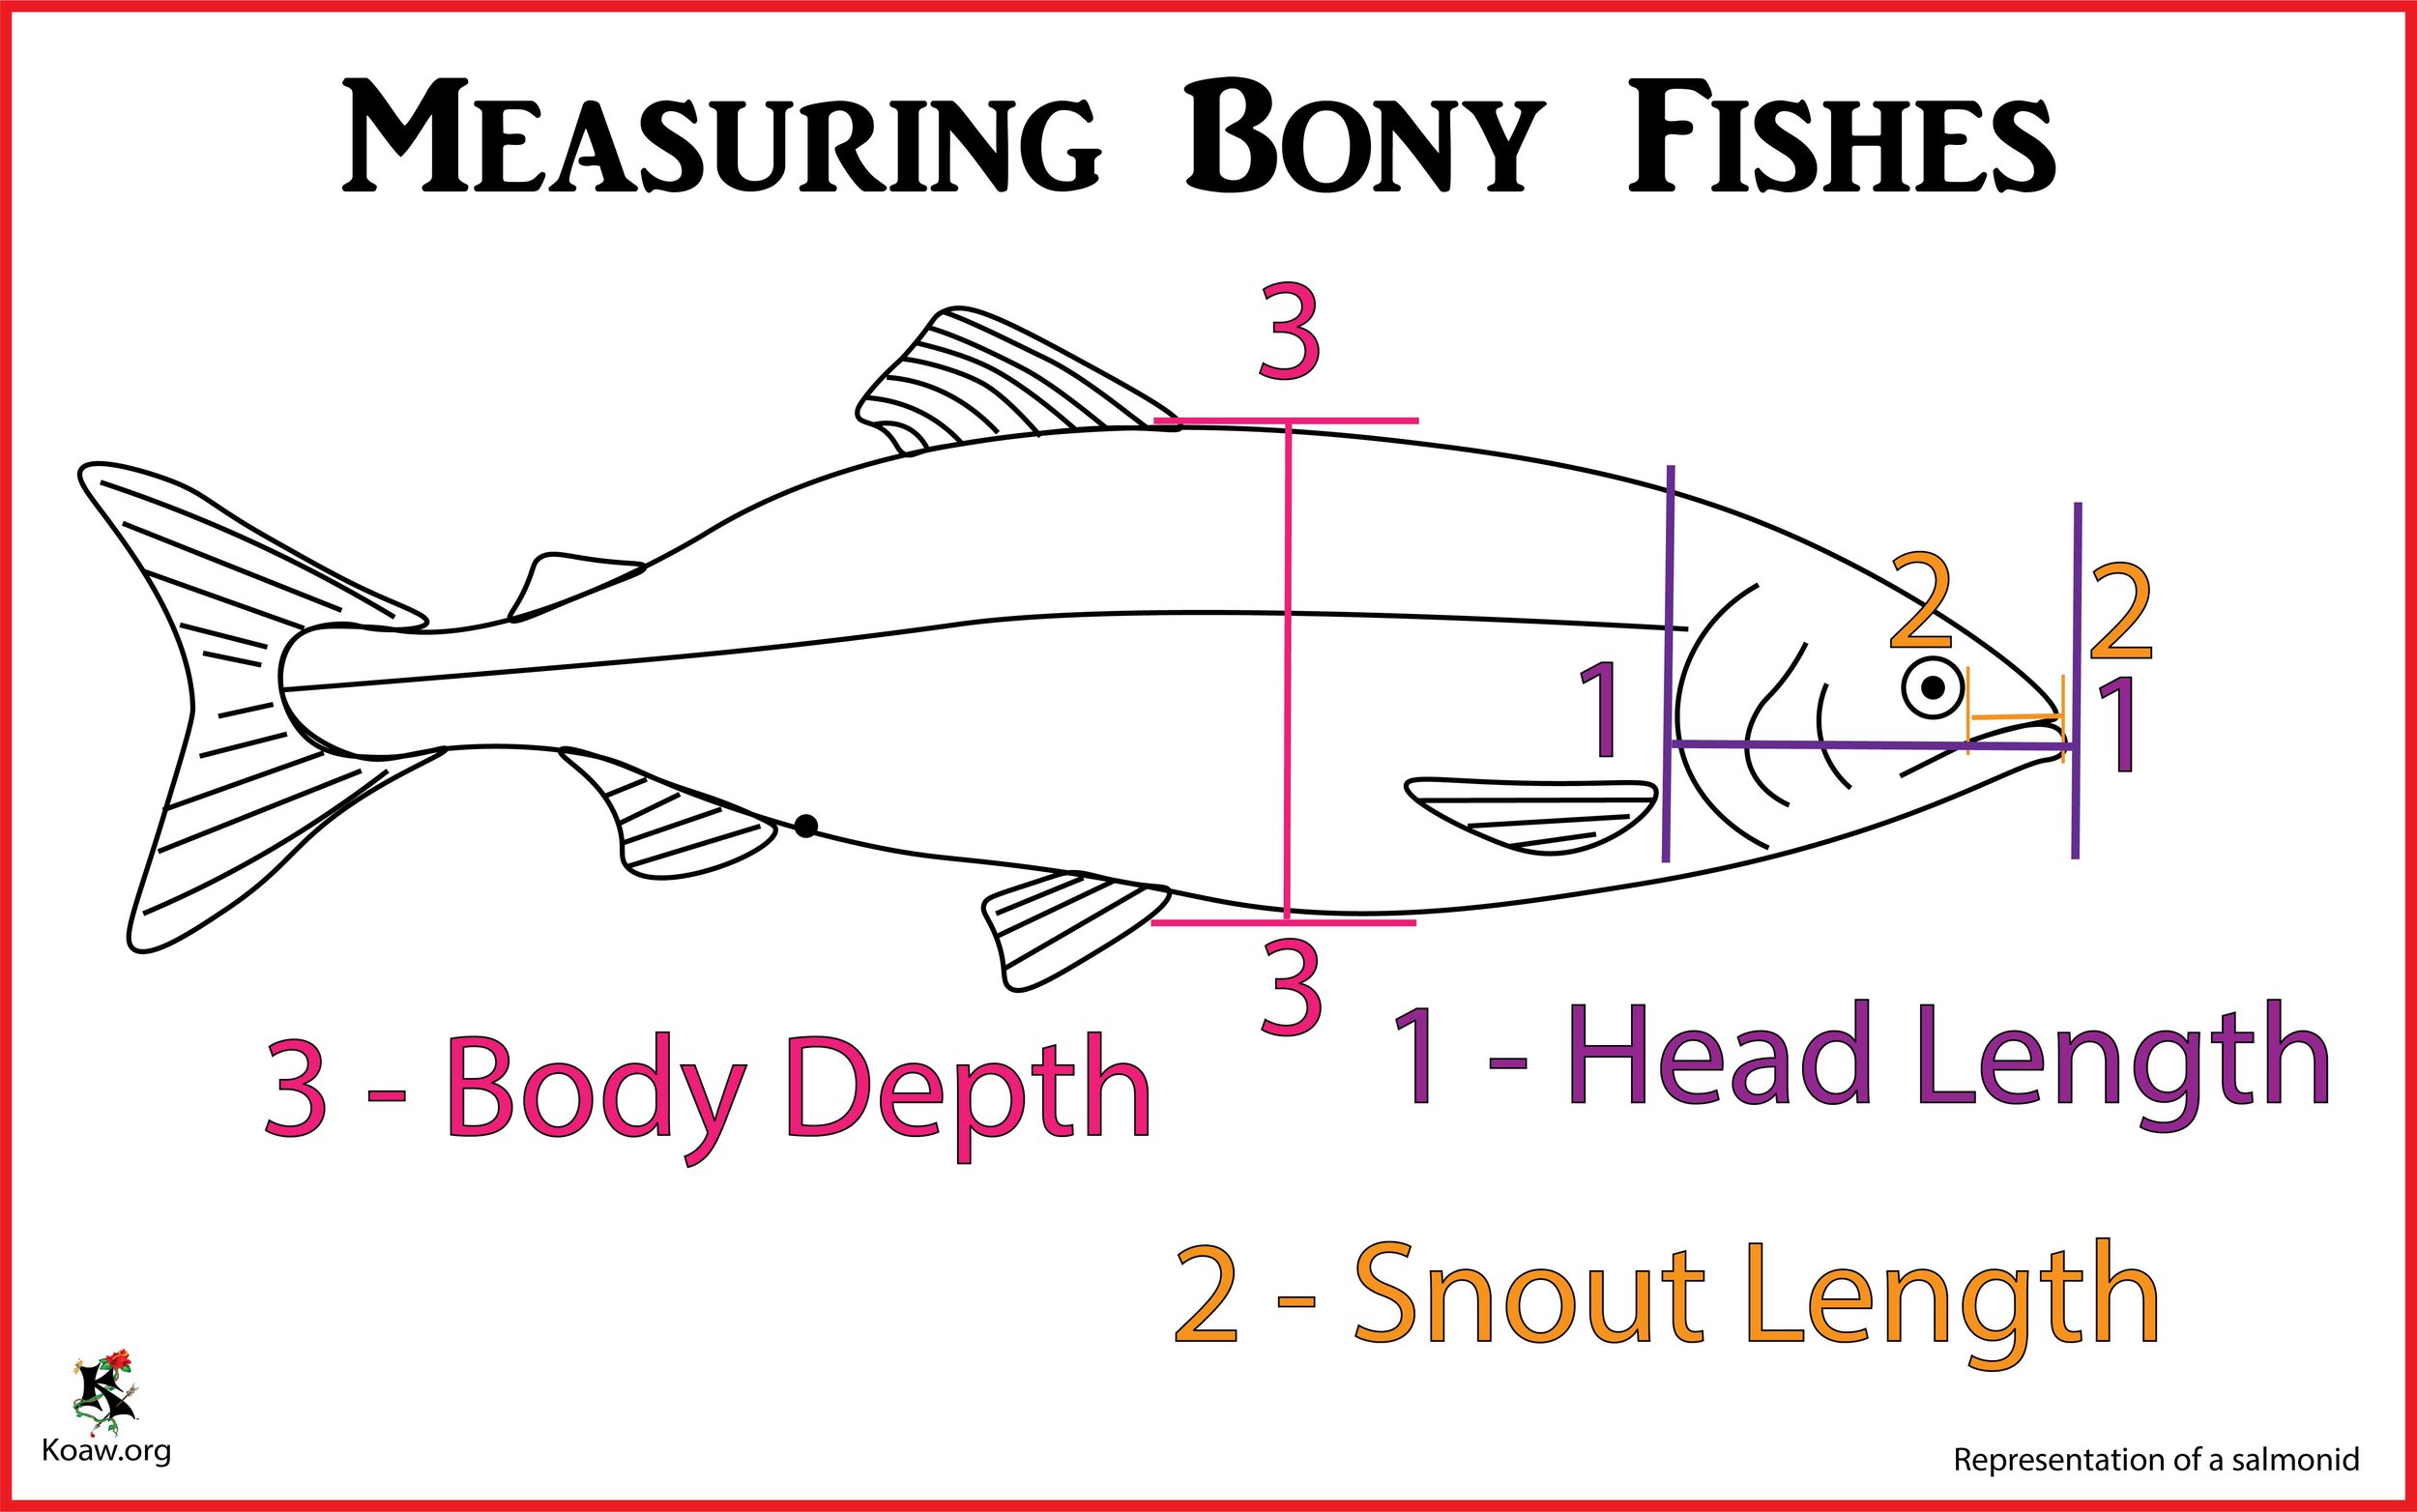 Measuring Fishes Head Length, Snout Length & Body Depth - Illustration by Koaw